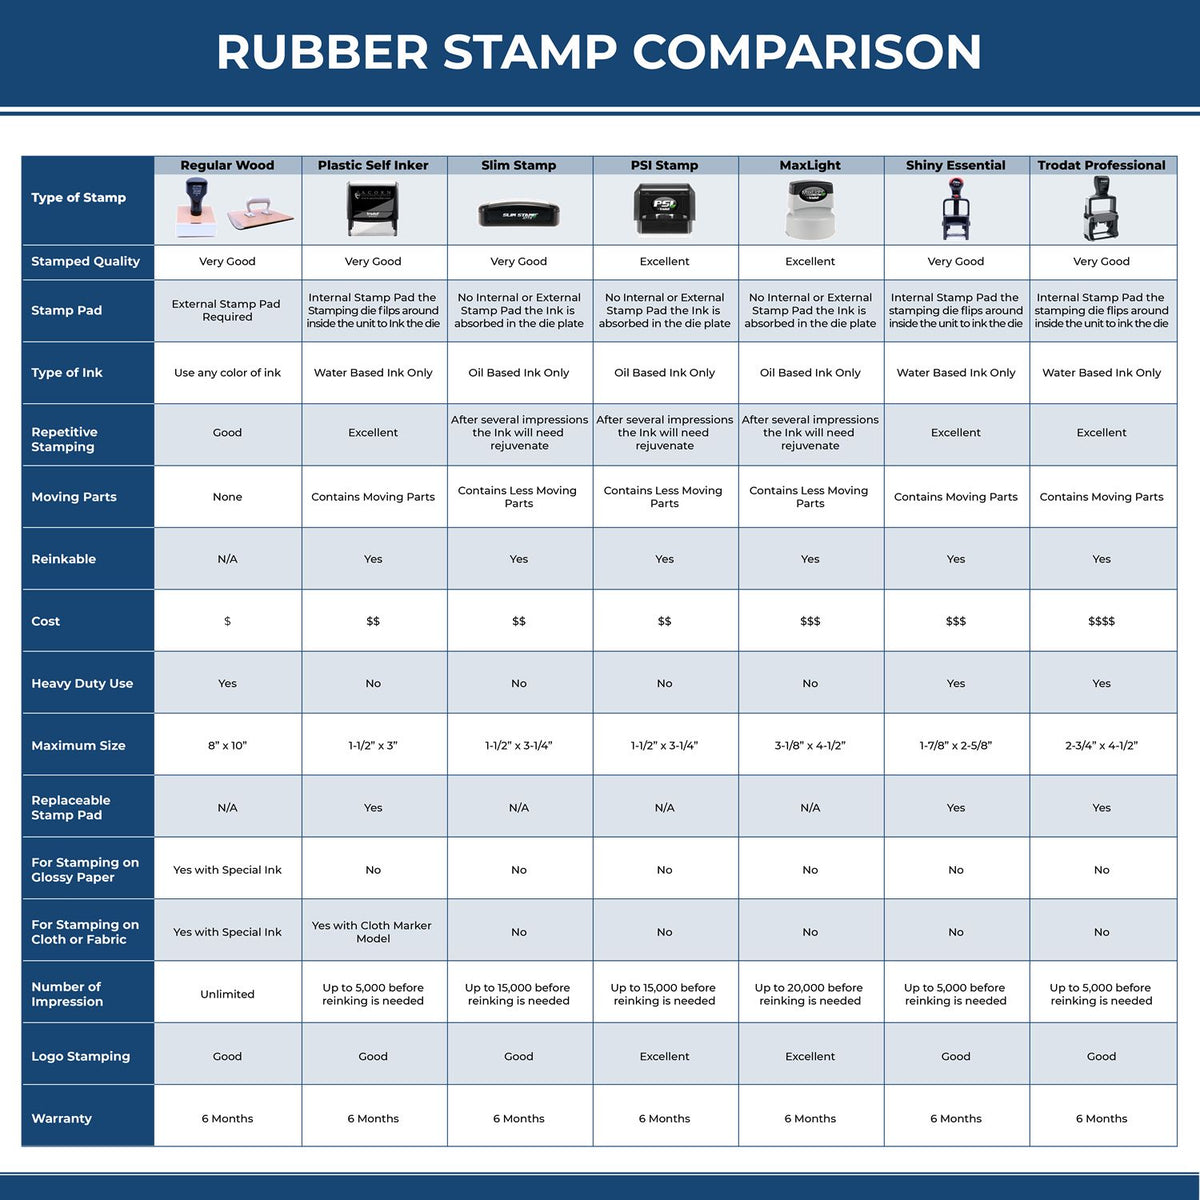 Received with Box Rubber Stamp 4826R Rubber Stamp Comparison